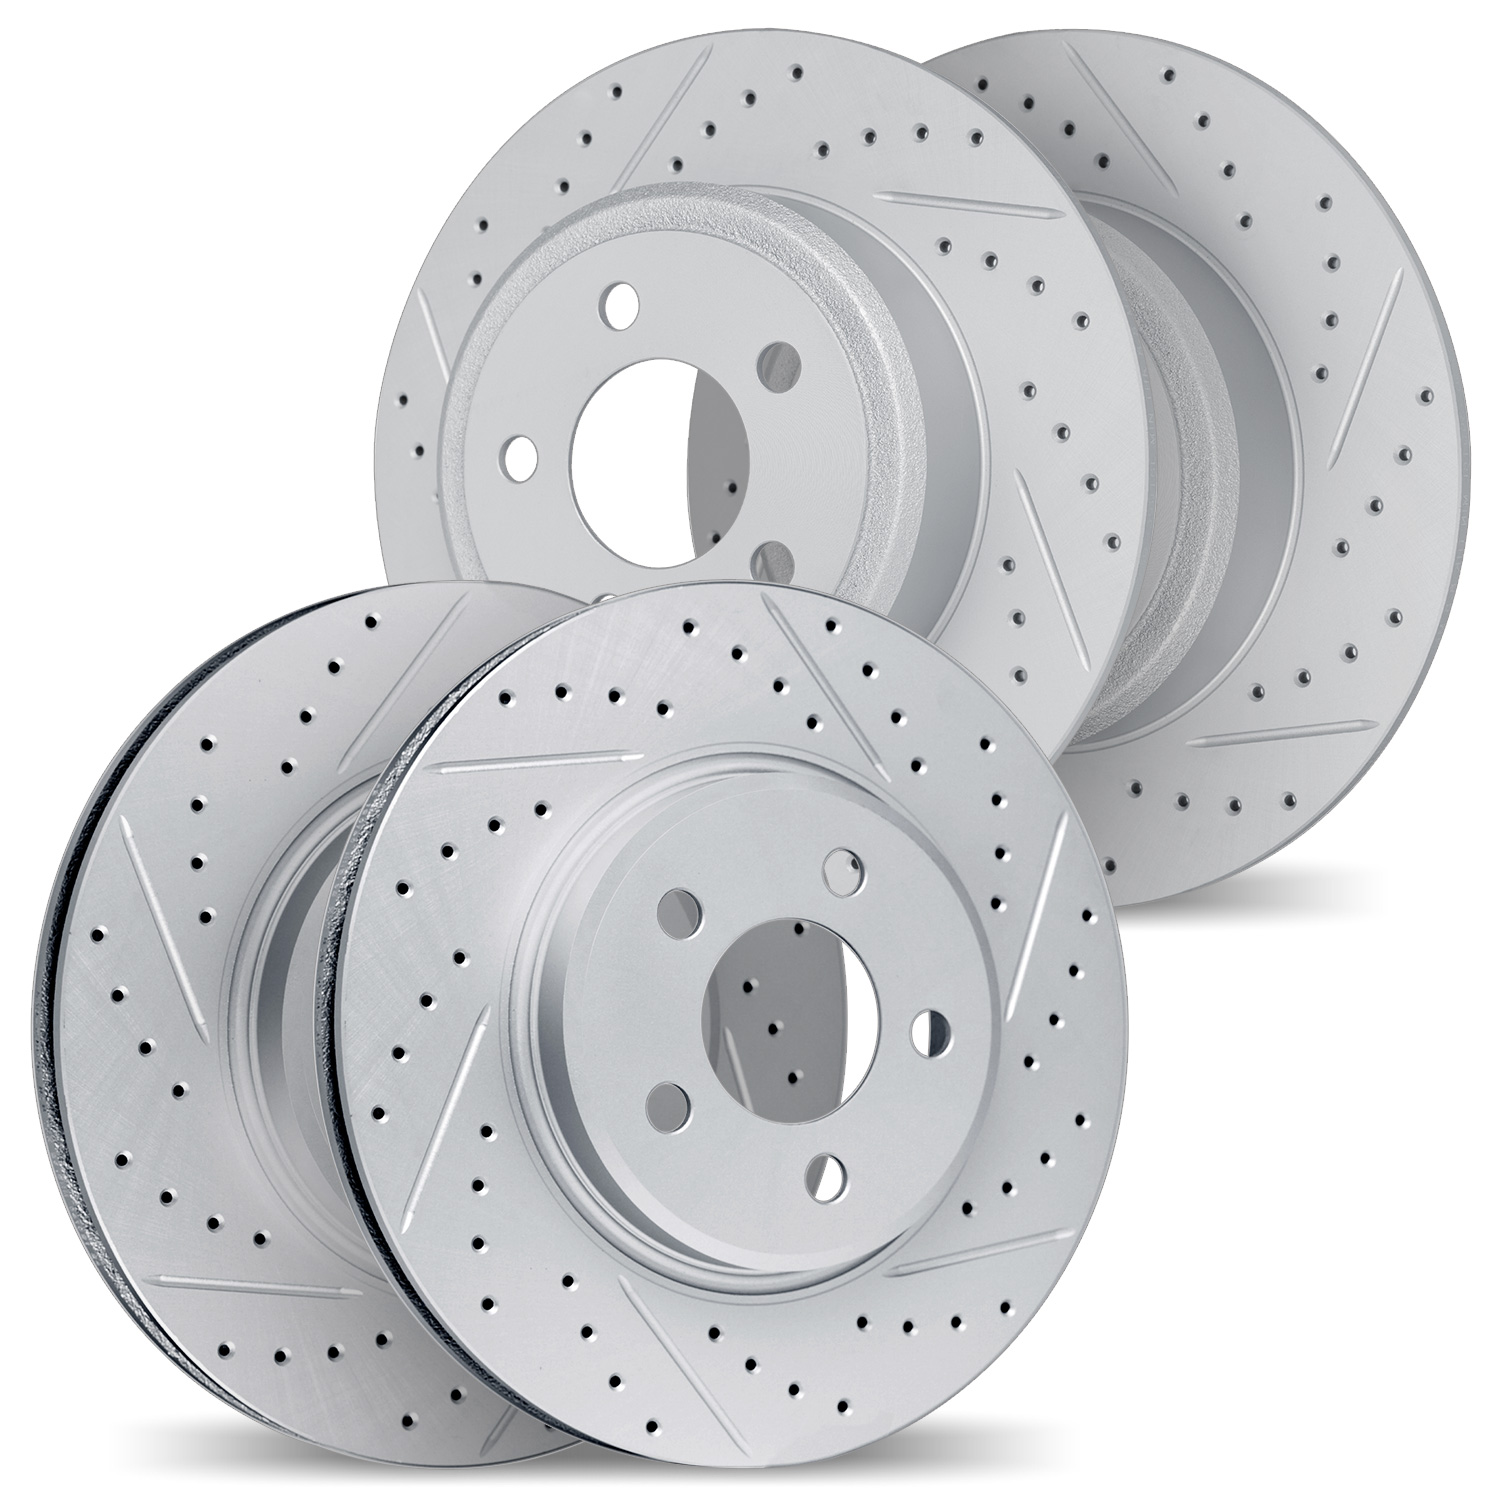 2004-59021 Geoperformance Drilled/Slotted Brake Rotors, 1998-2002 Acura/Honda, Position: Front and Rear